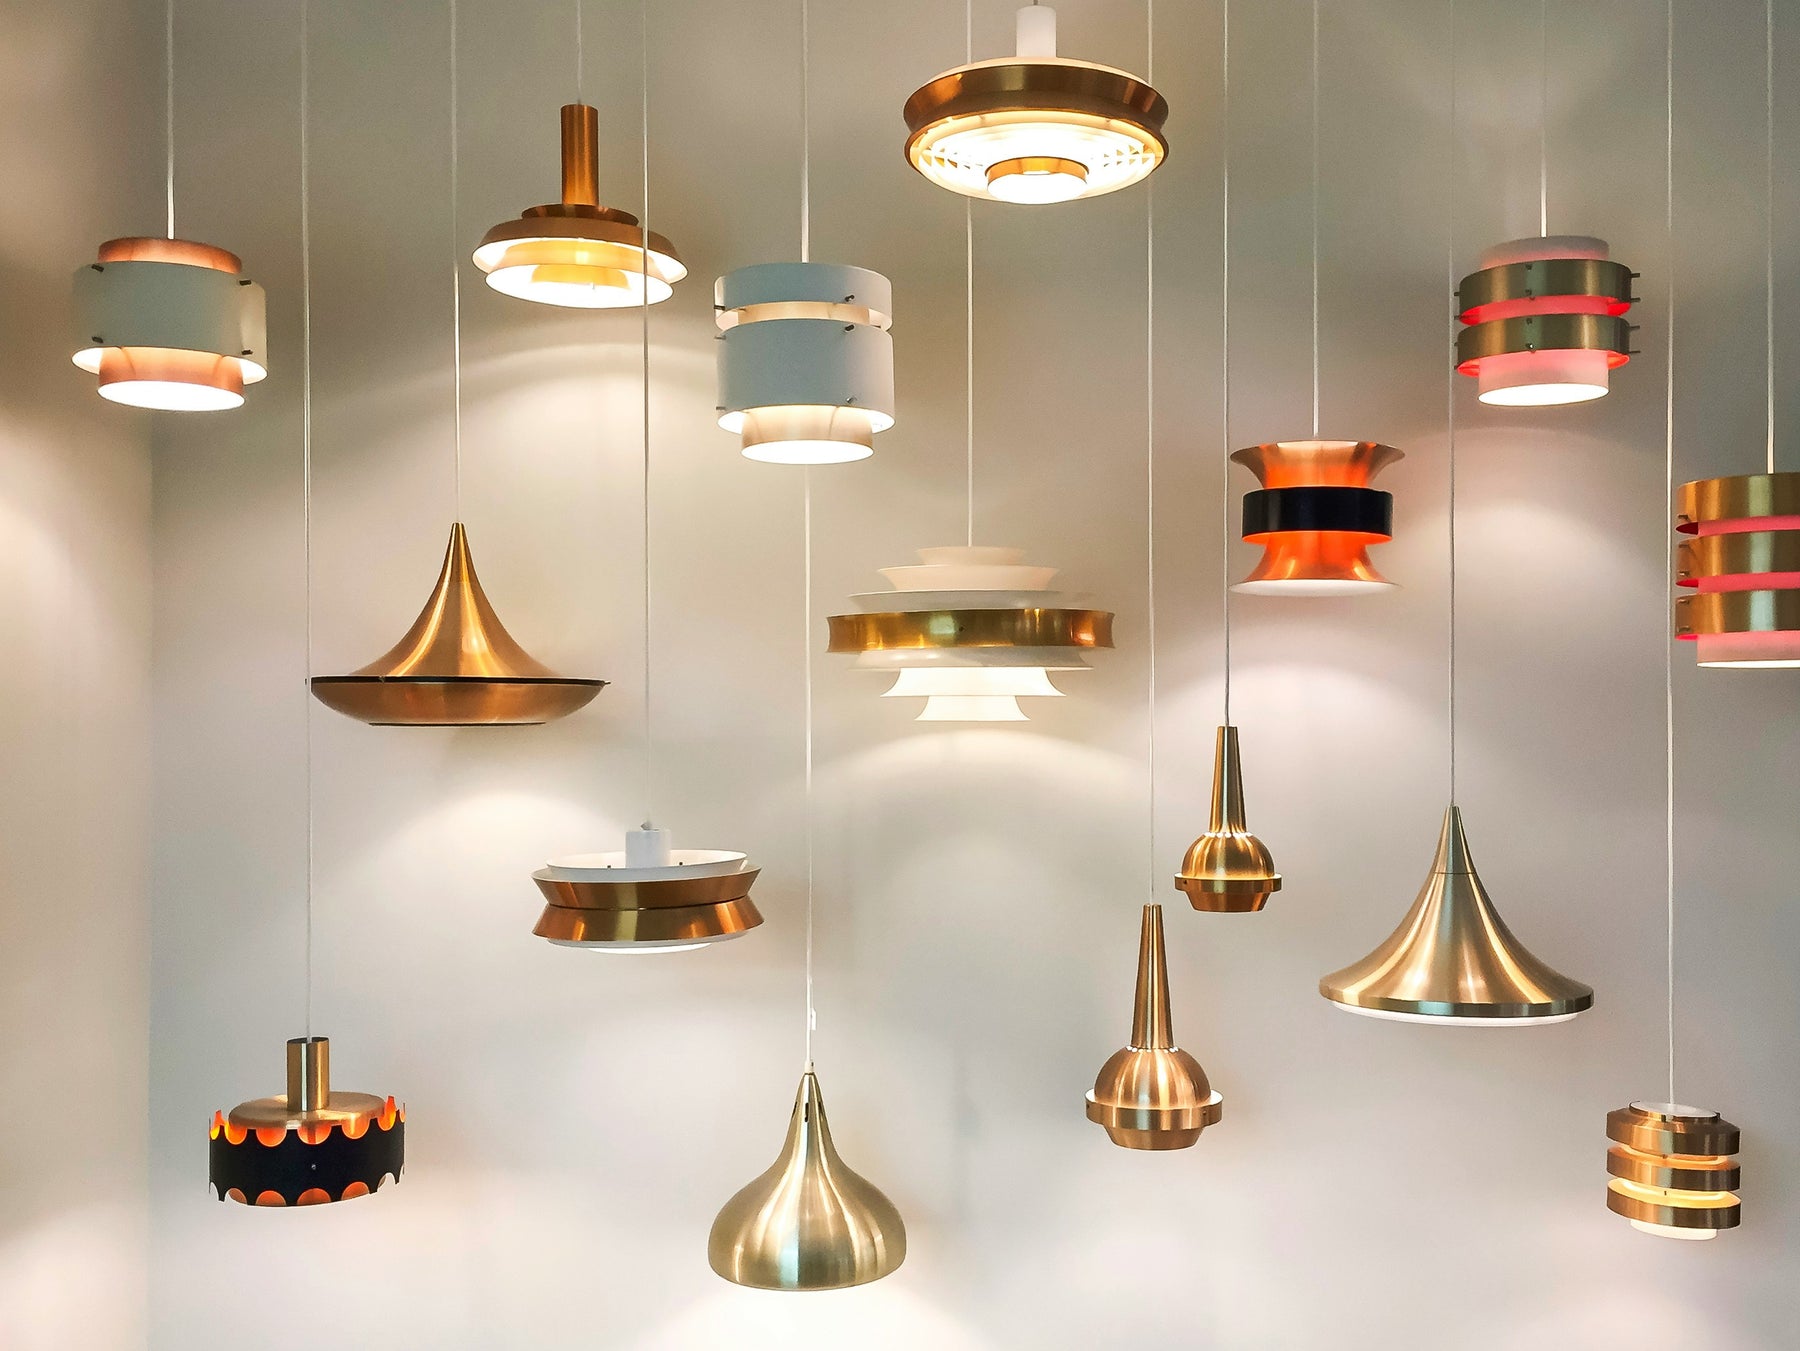 FASHIONABLE LIGHTING: Exploring styles of interior lamps